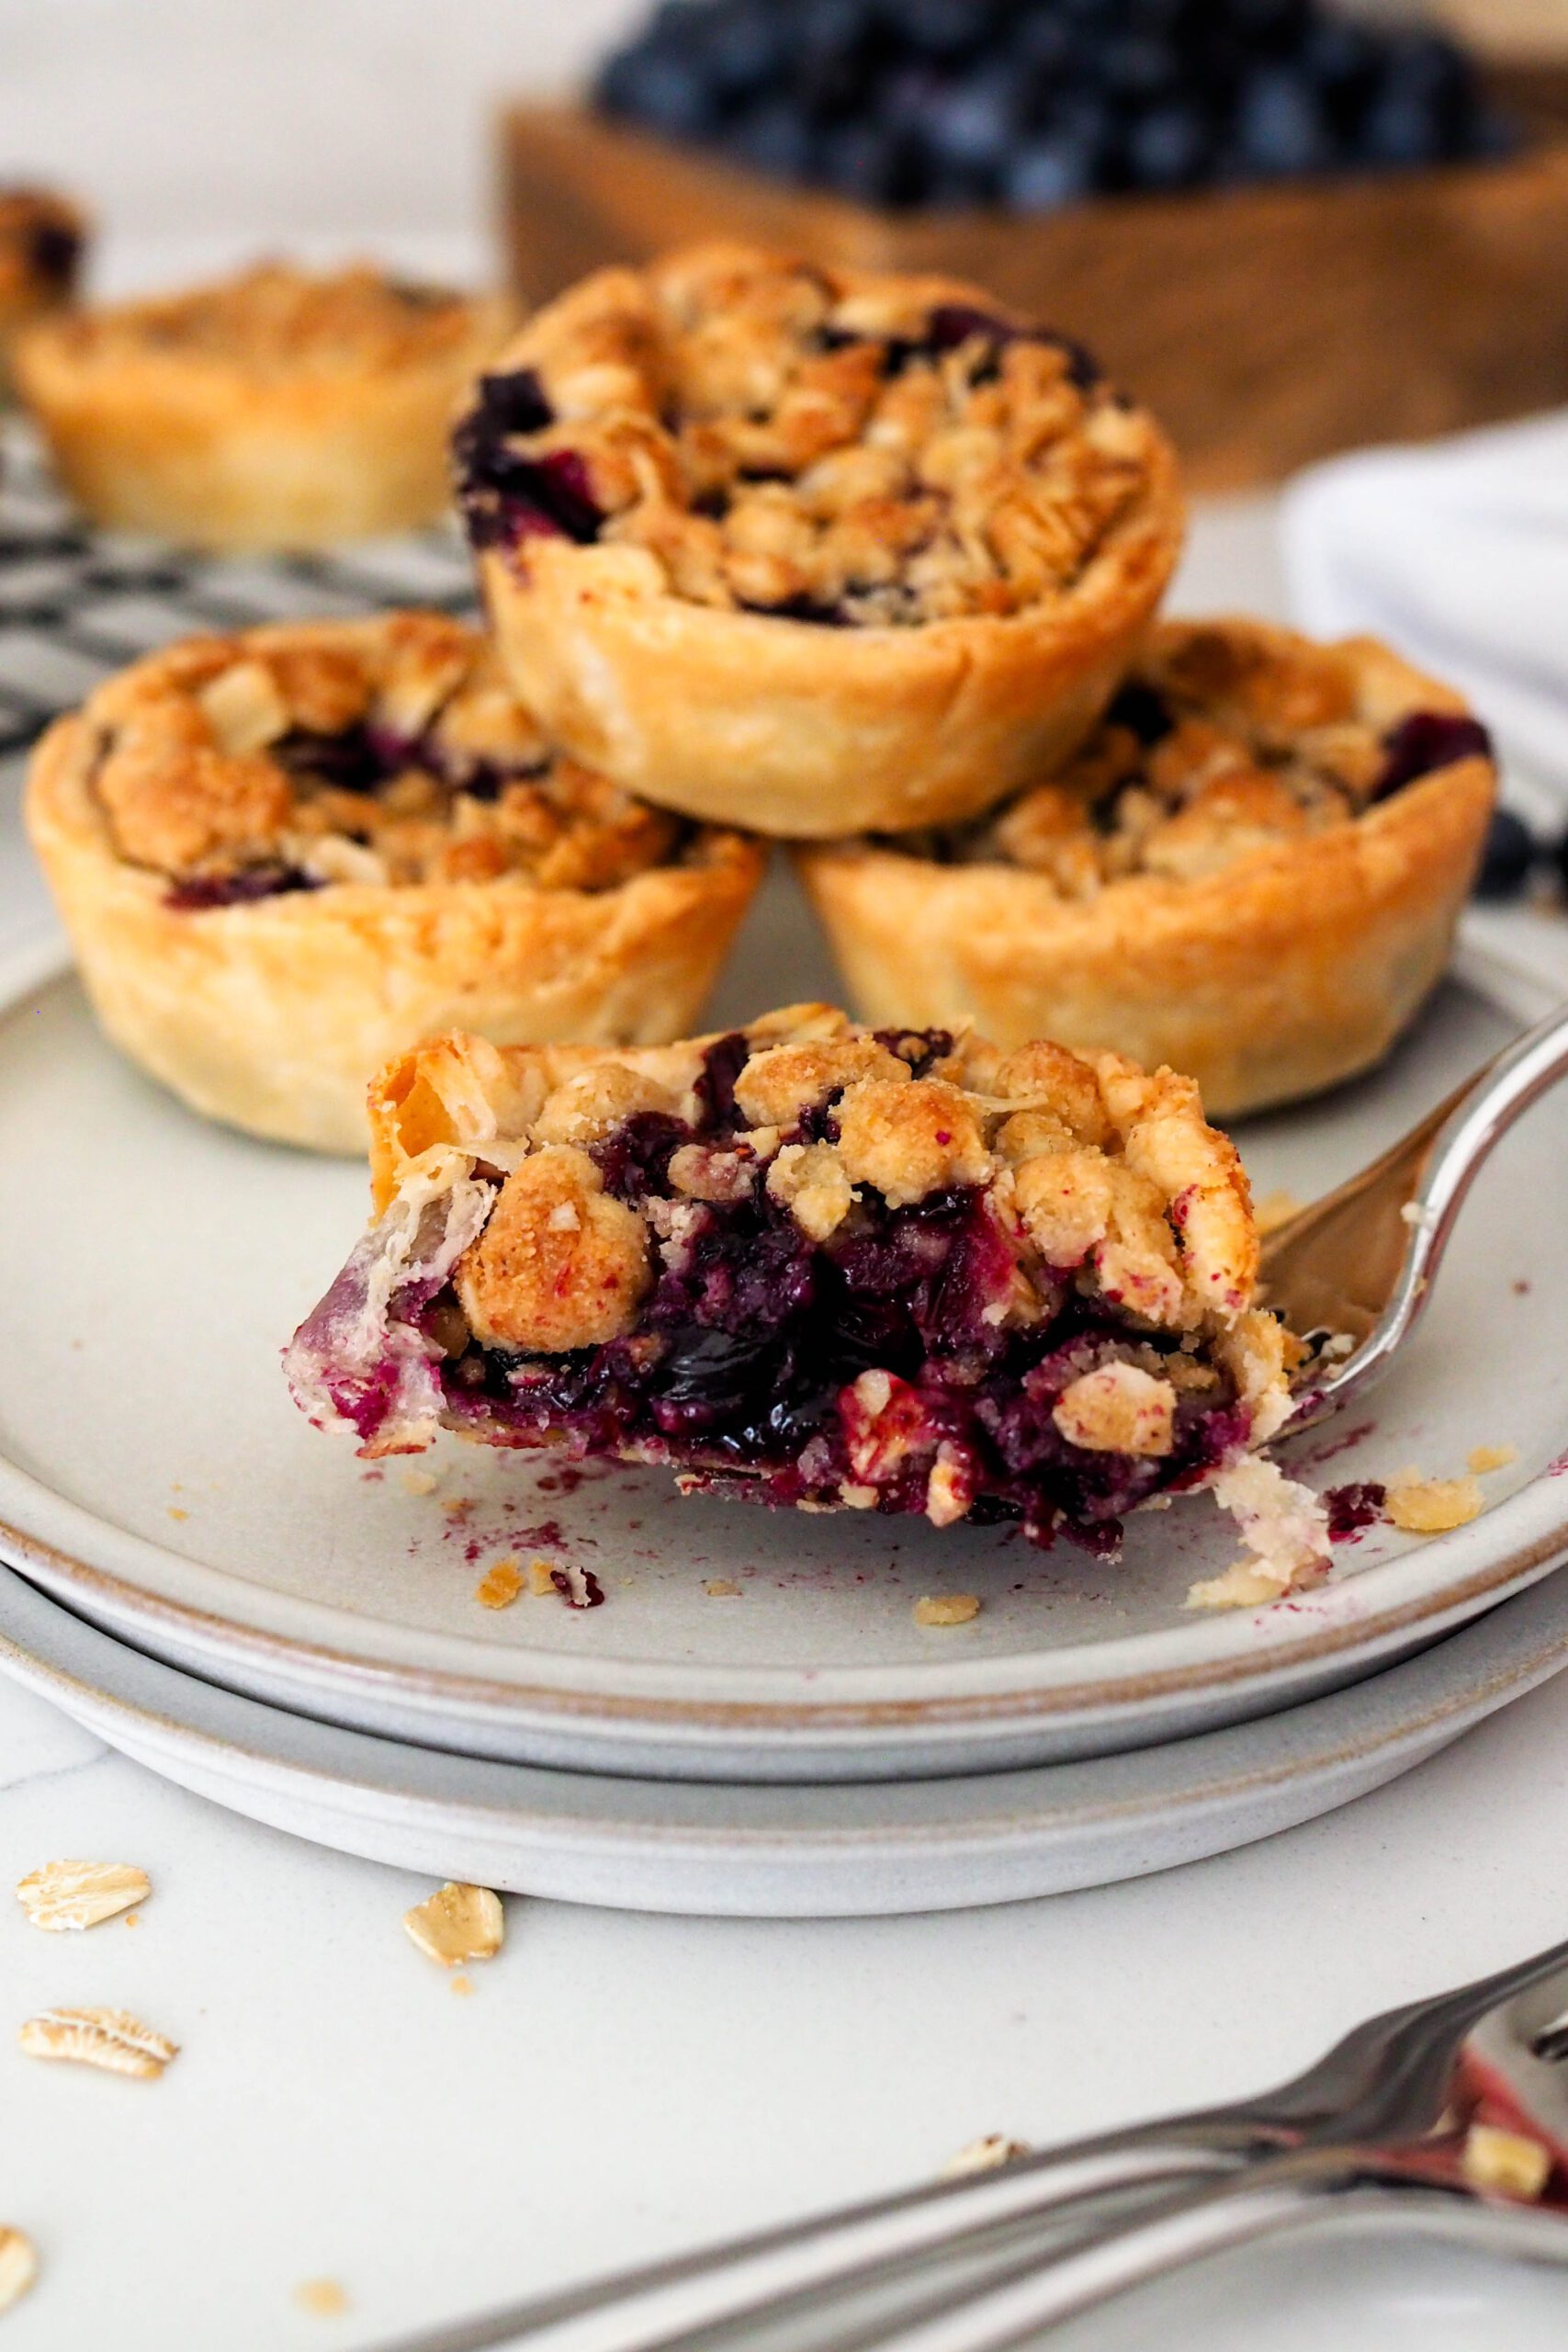 A closeup of the inside of a mini blueberry pie.